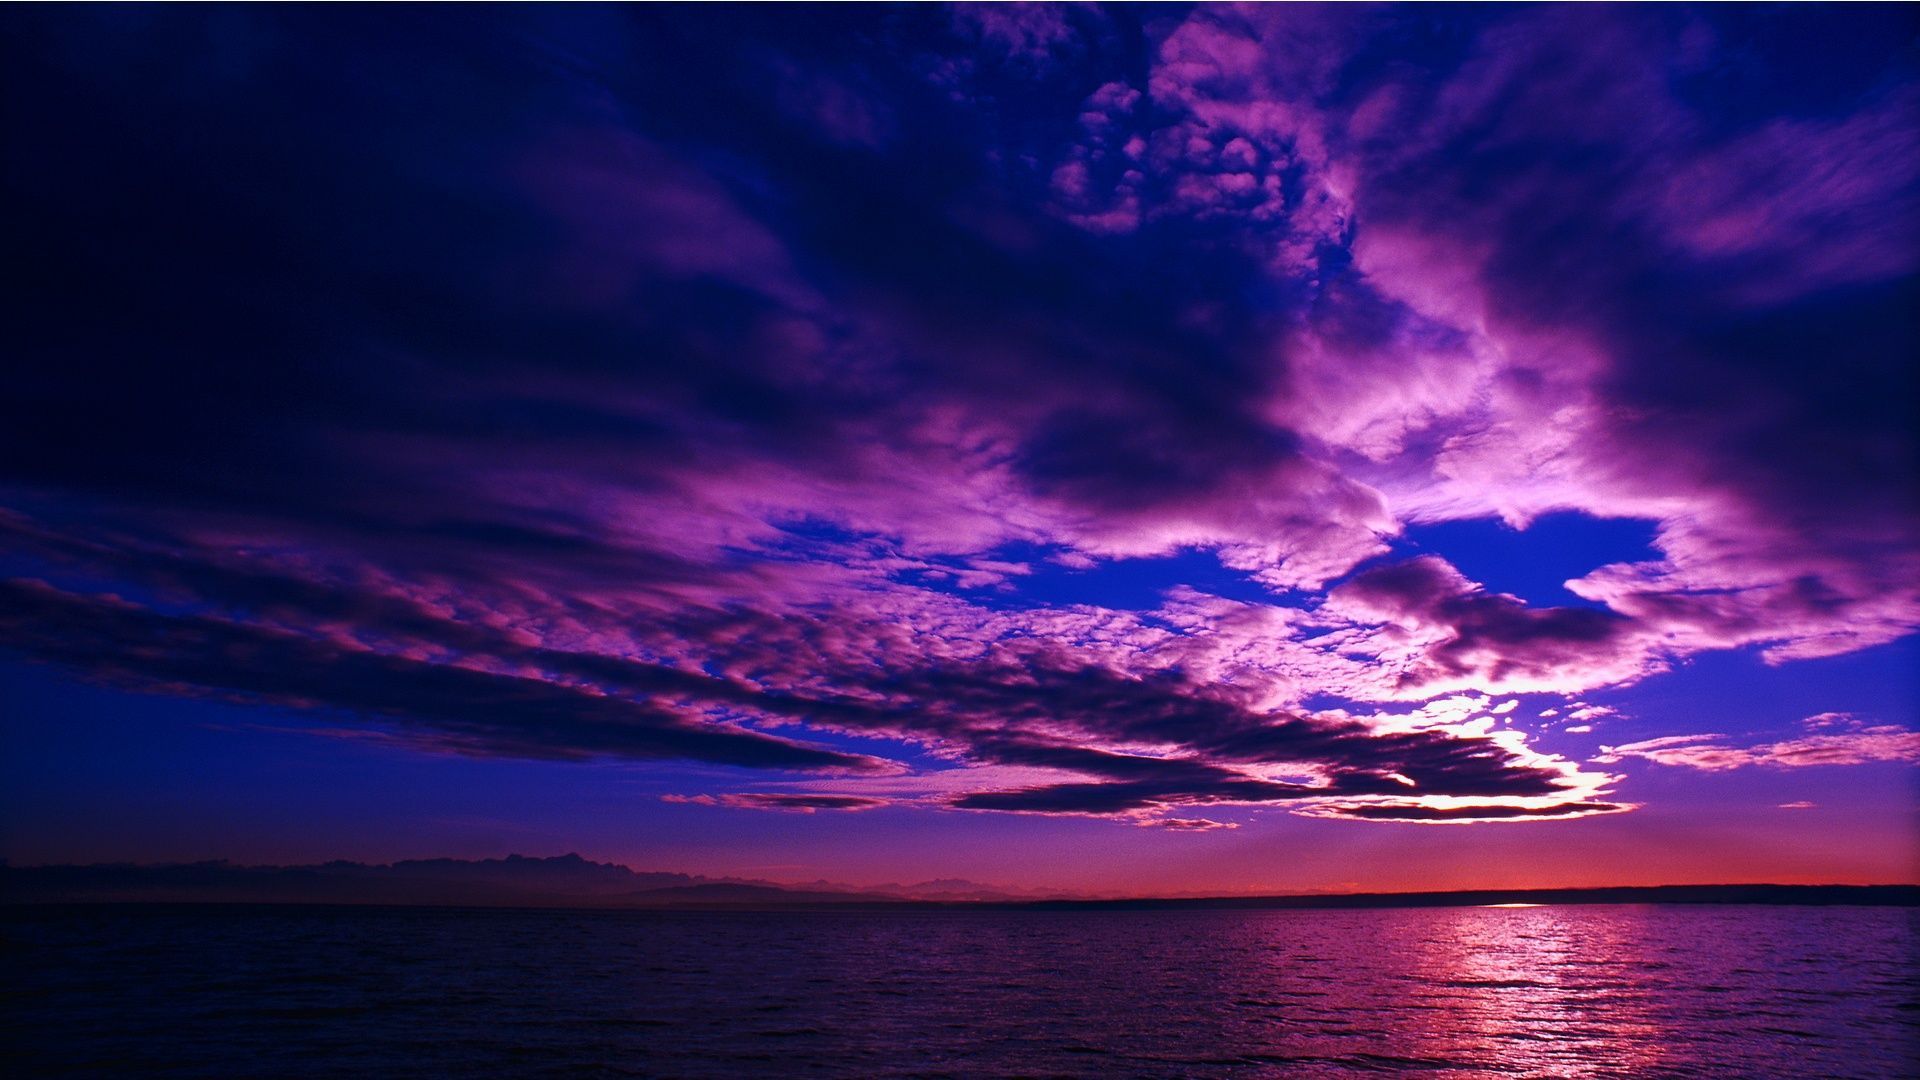 A Purple Sunset Hd Wallpapers Wallpaper Cave